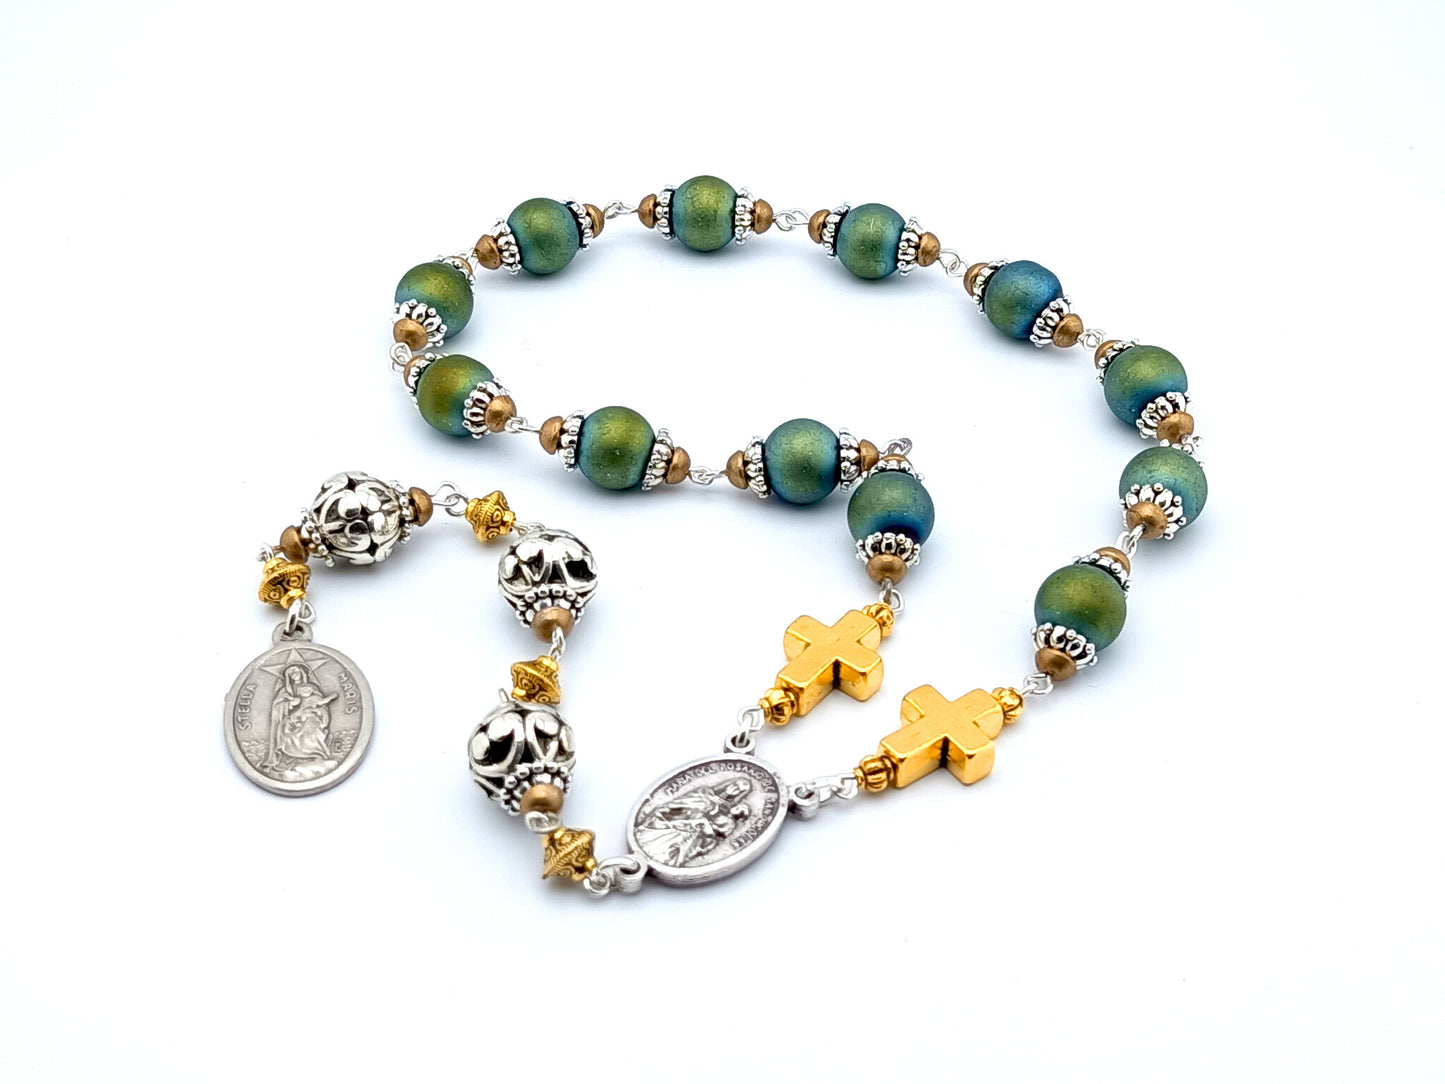 Our Lady Star of the Sea unique rosary beads prayer chaplet with blue green glass and golden cross beads, silver Our Lady of the Rosary medal and silver lattice bali beads.